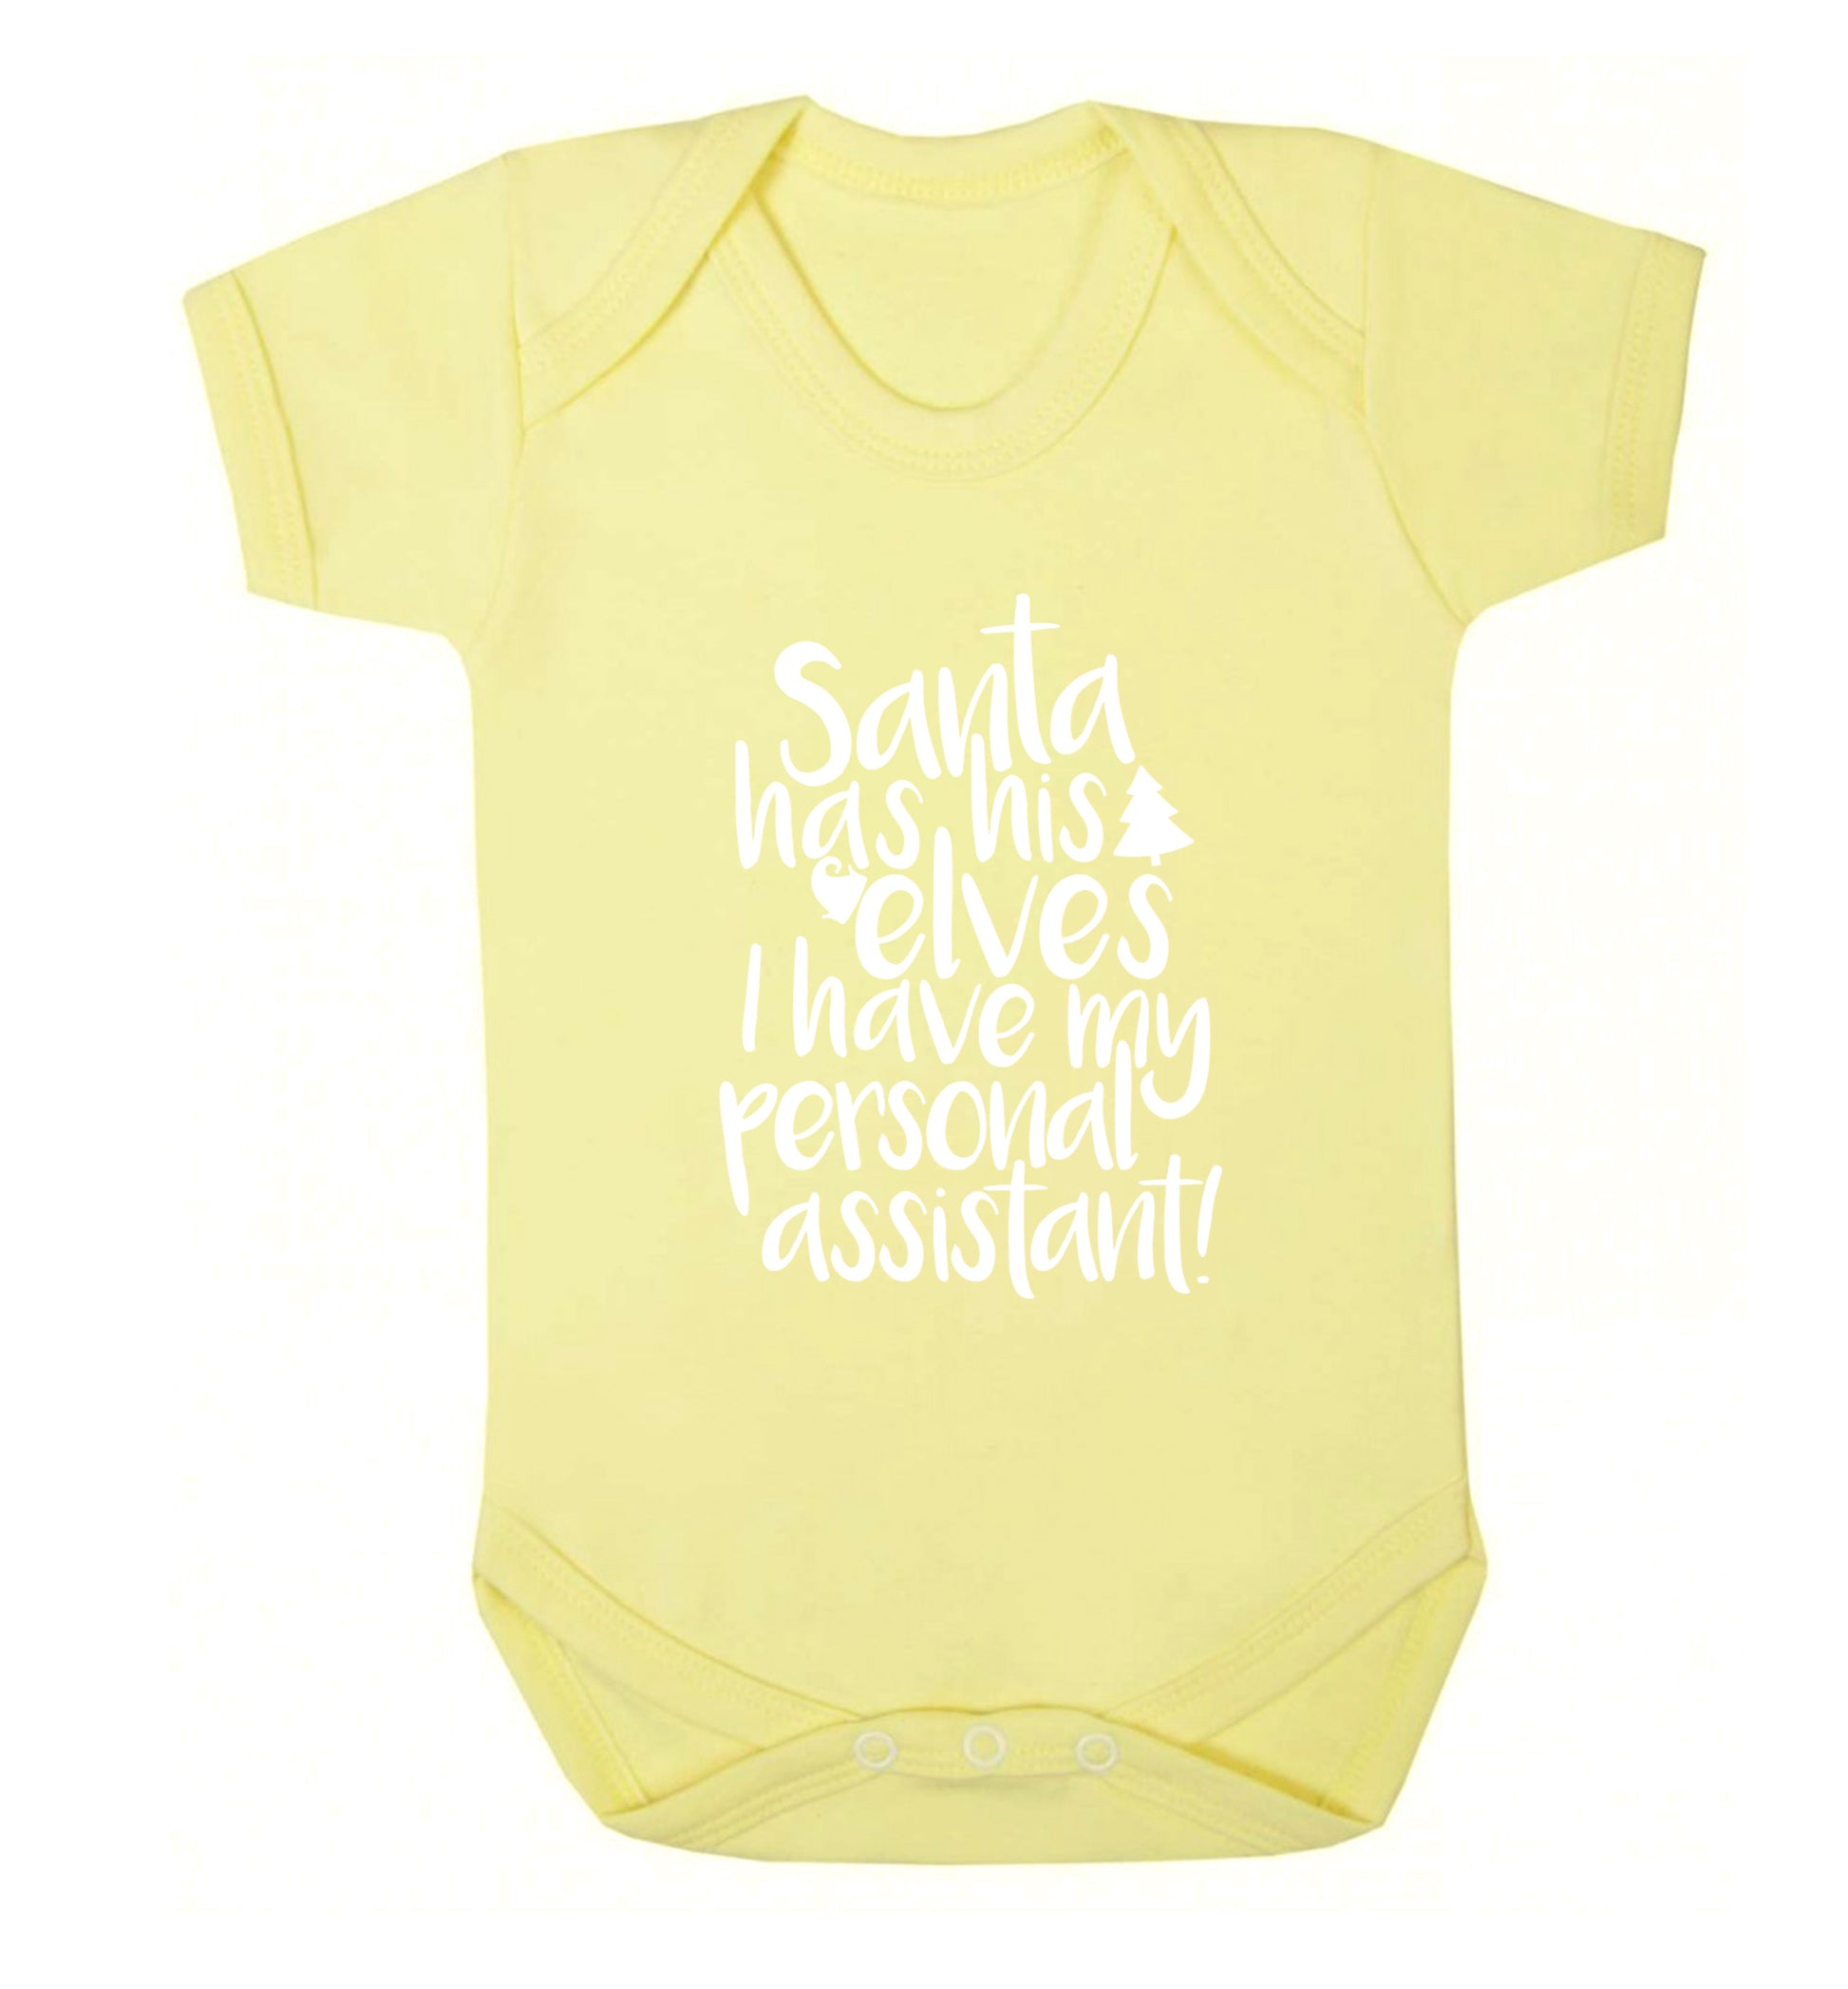 Santa has his elves I have my personal assistant Baby Vest pale yellow 18-24 months